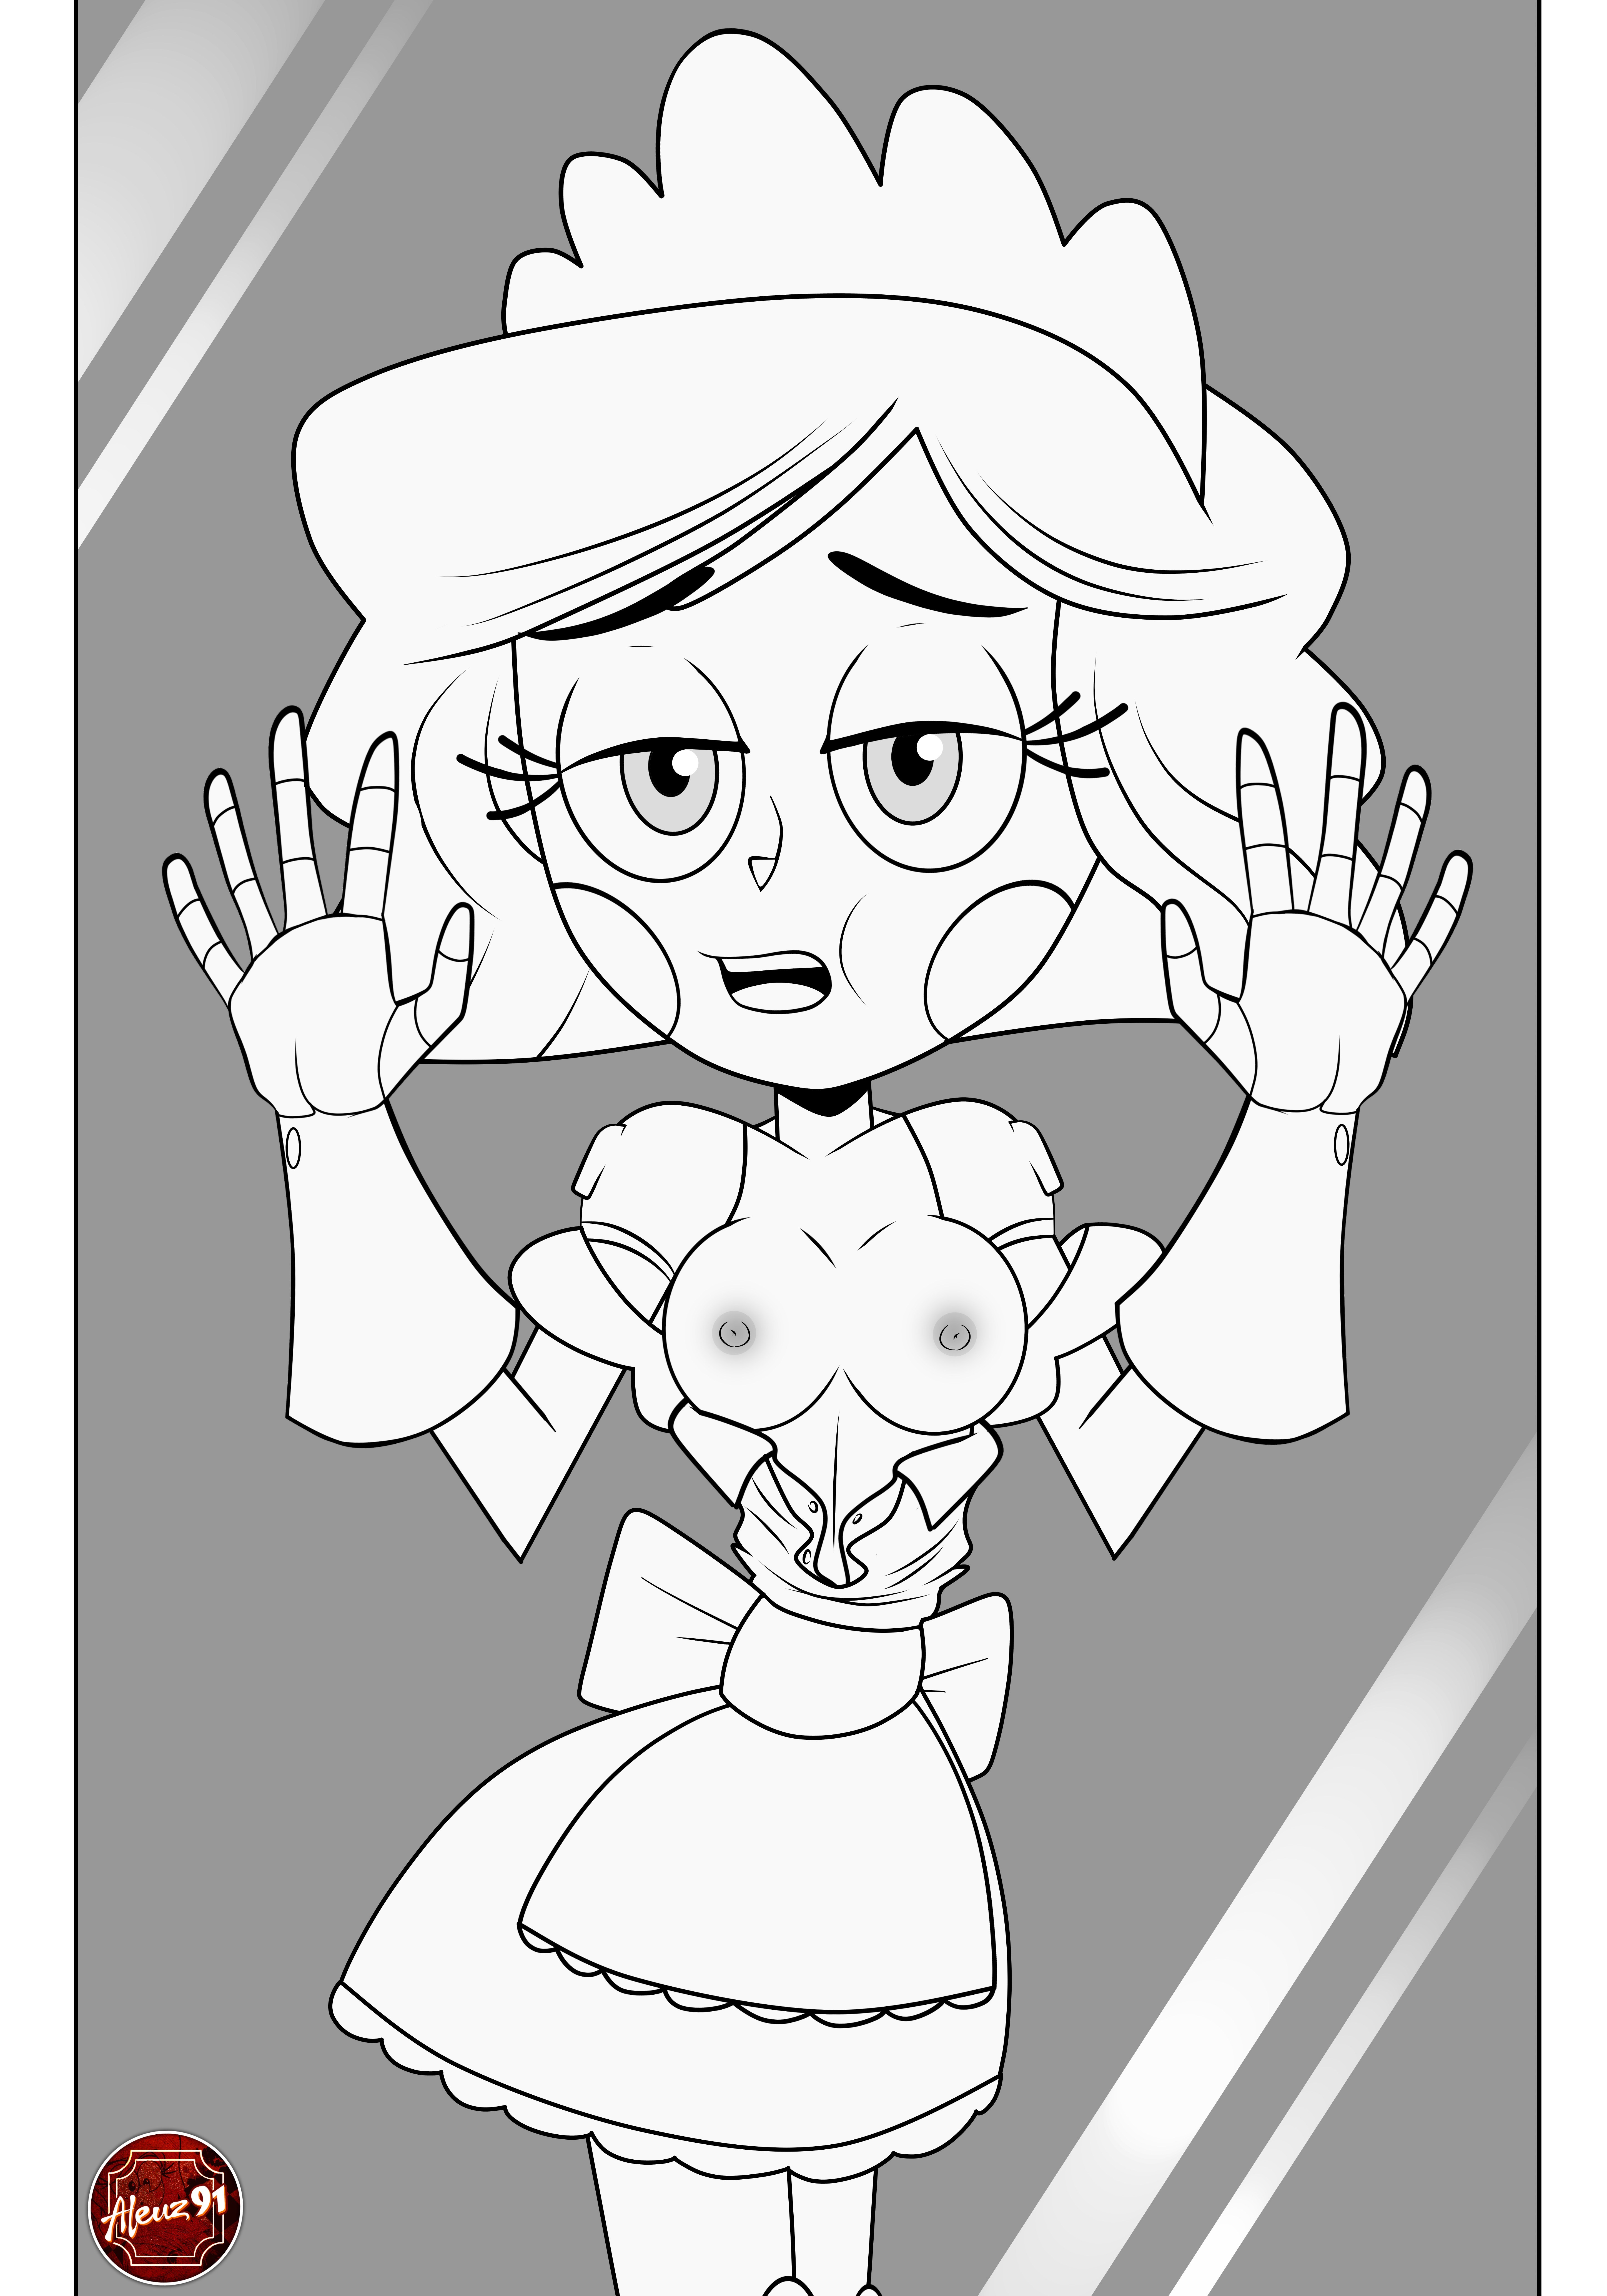 Emmy the maid robot